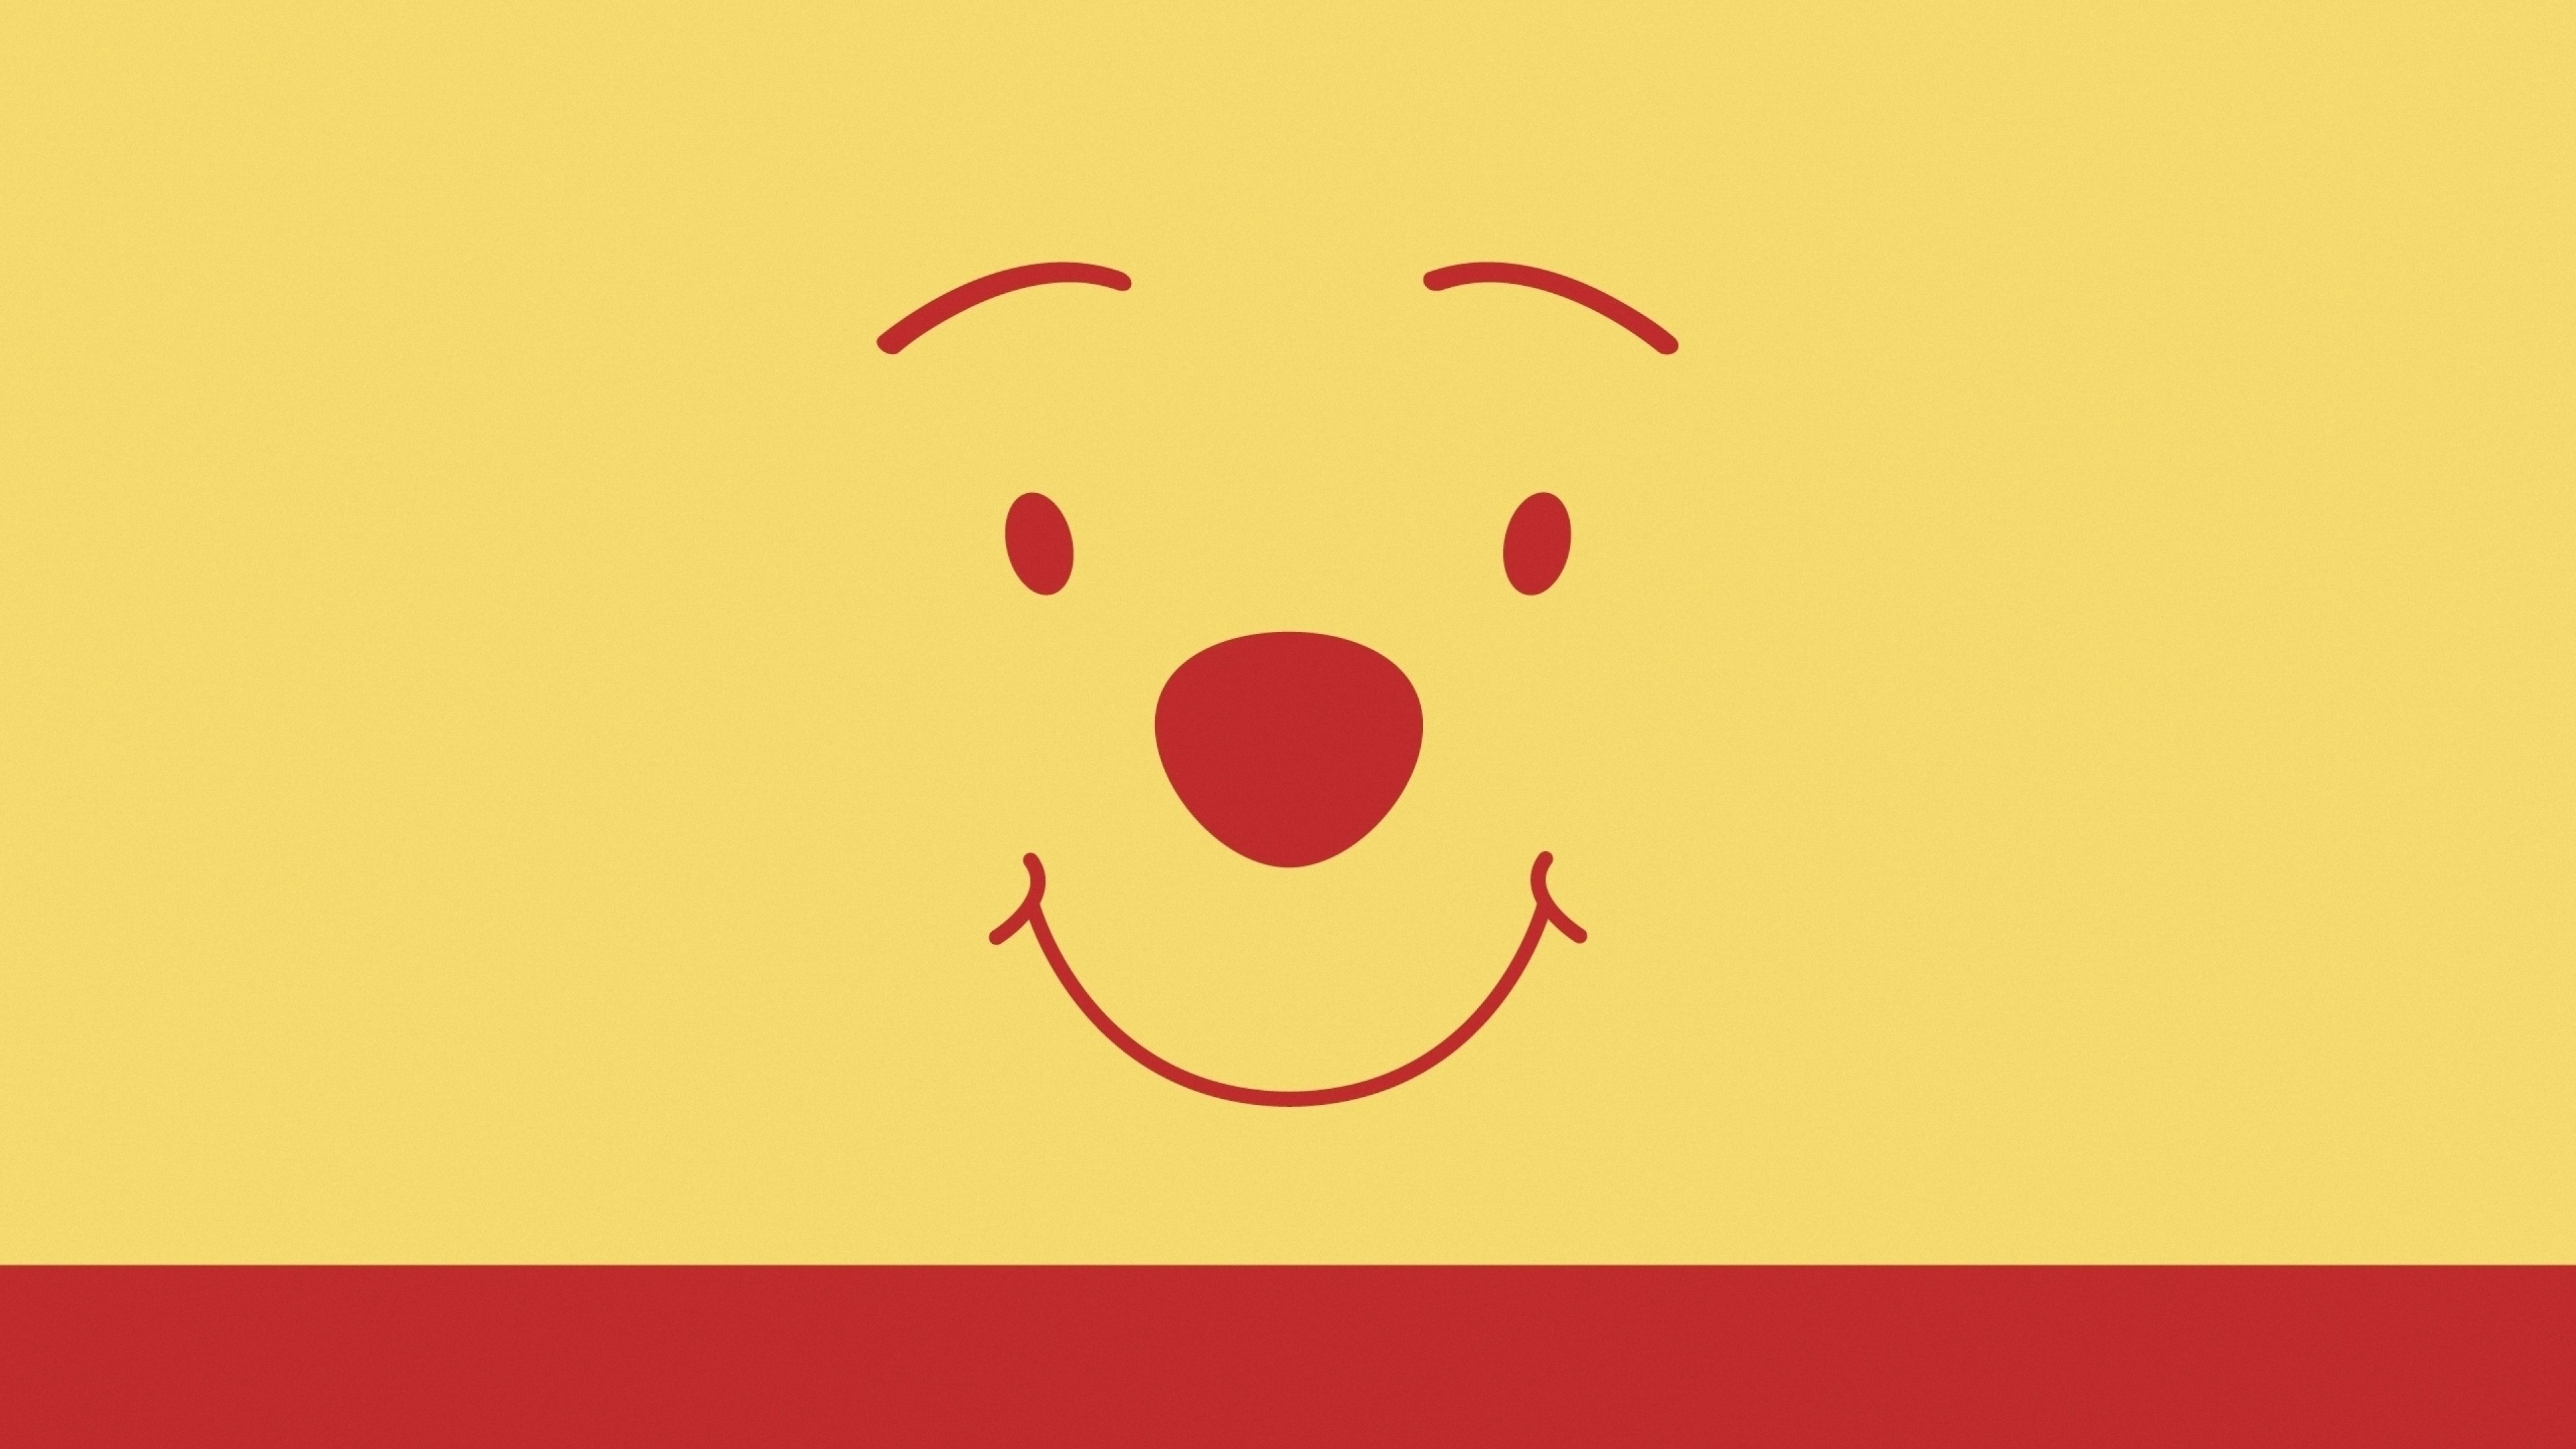 Pooh Bear Wallpapers (64+ images)